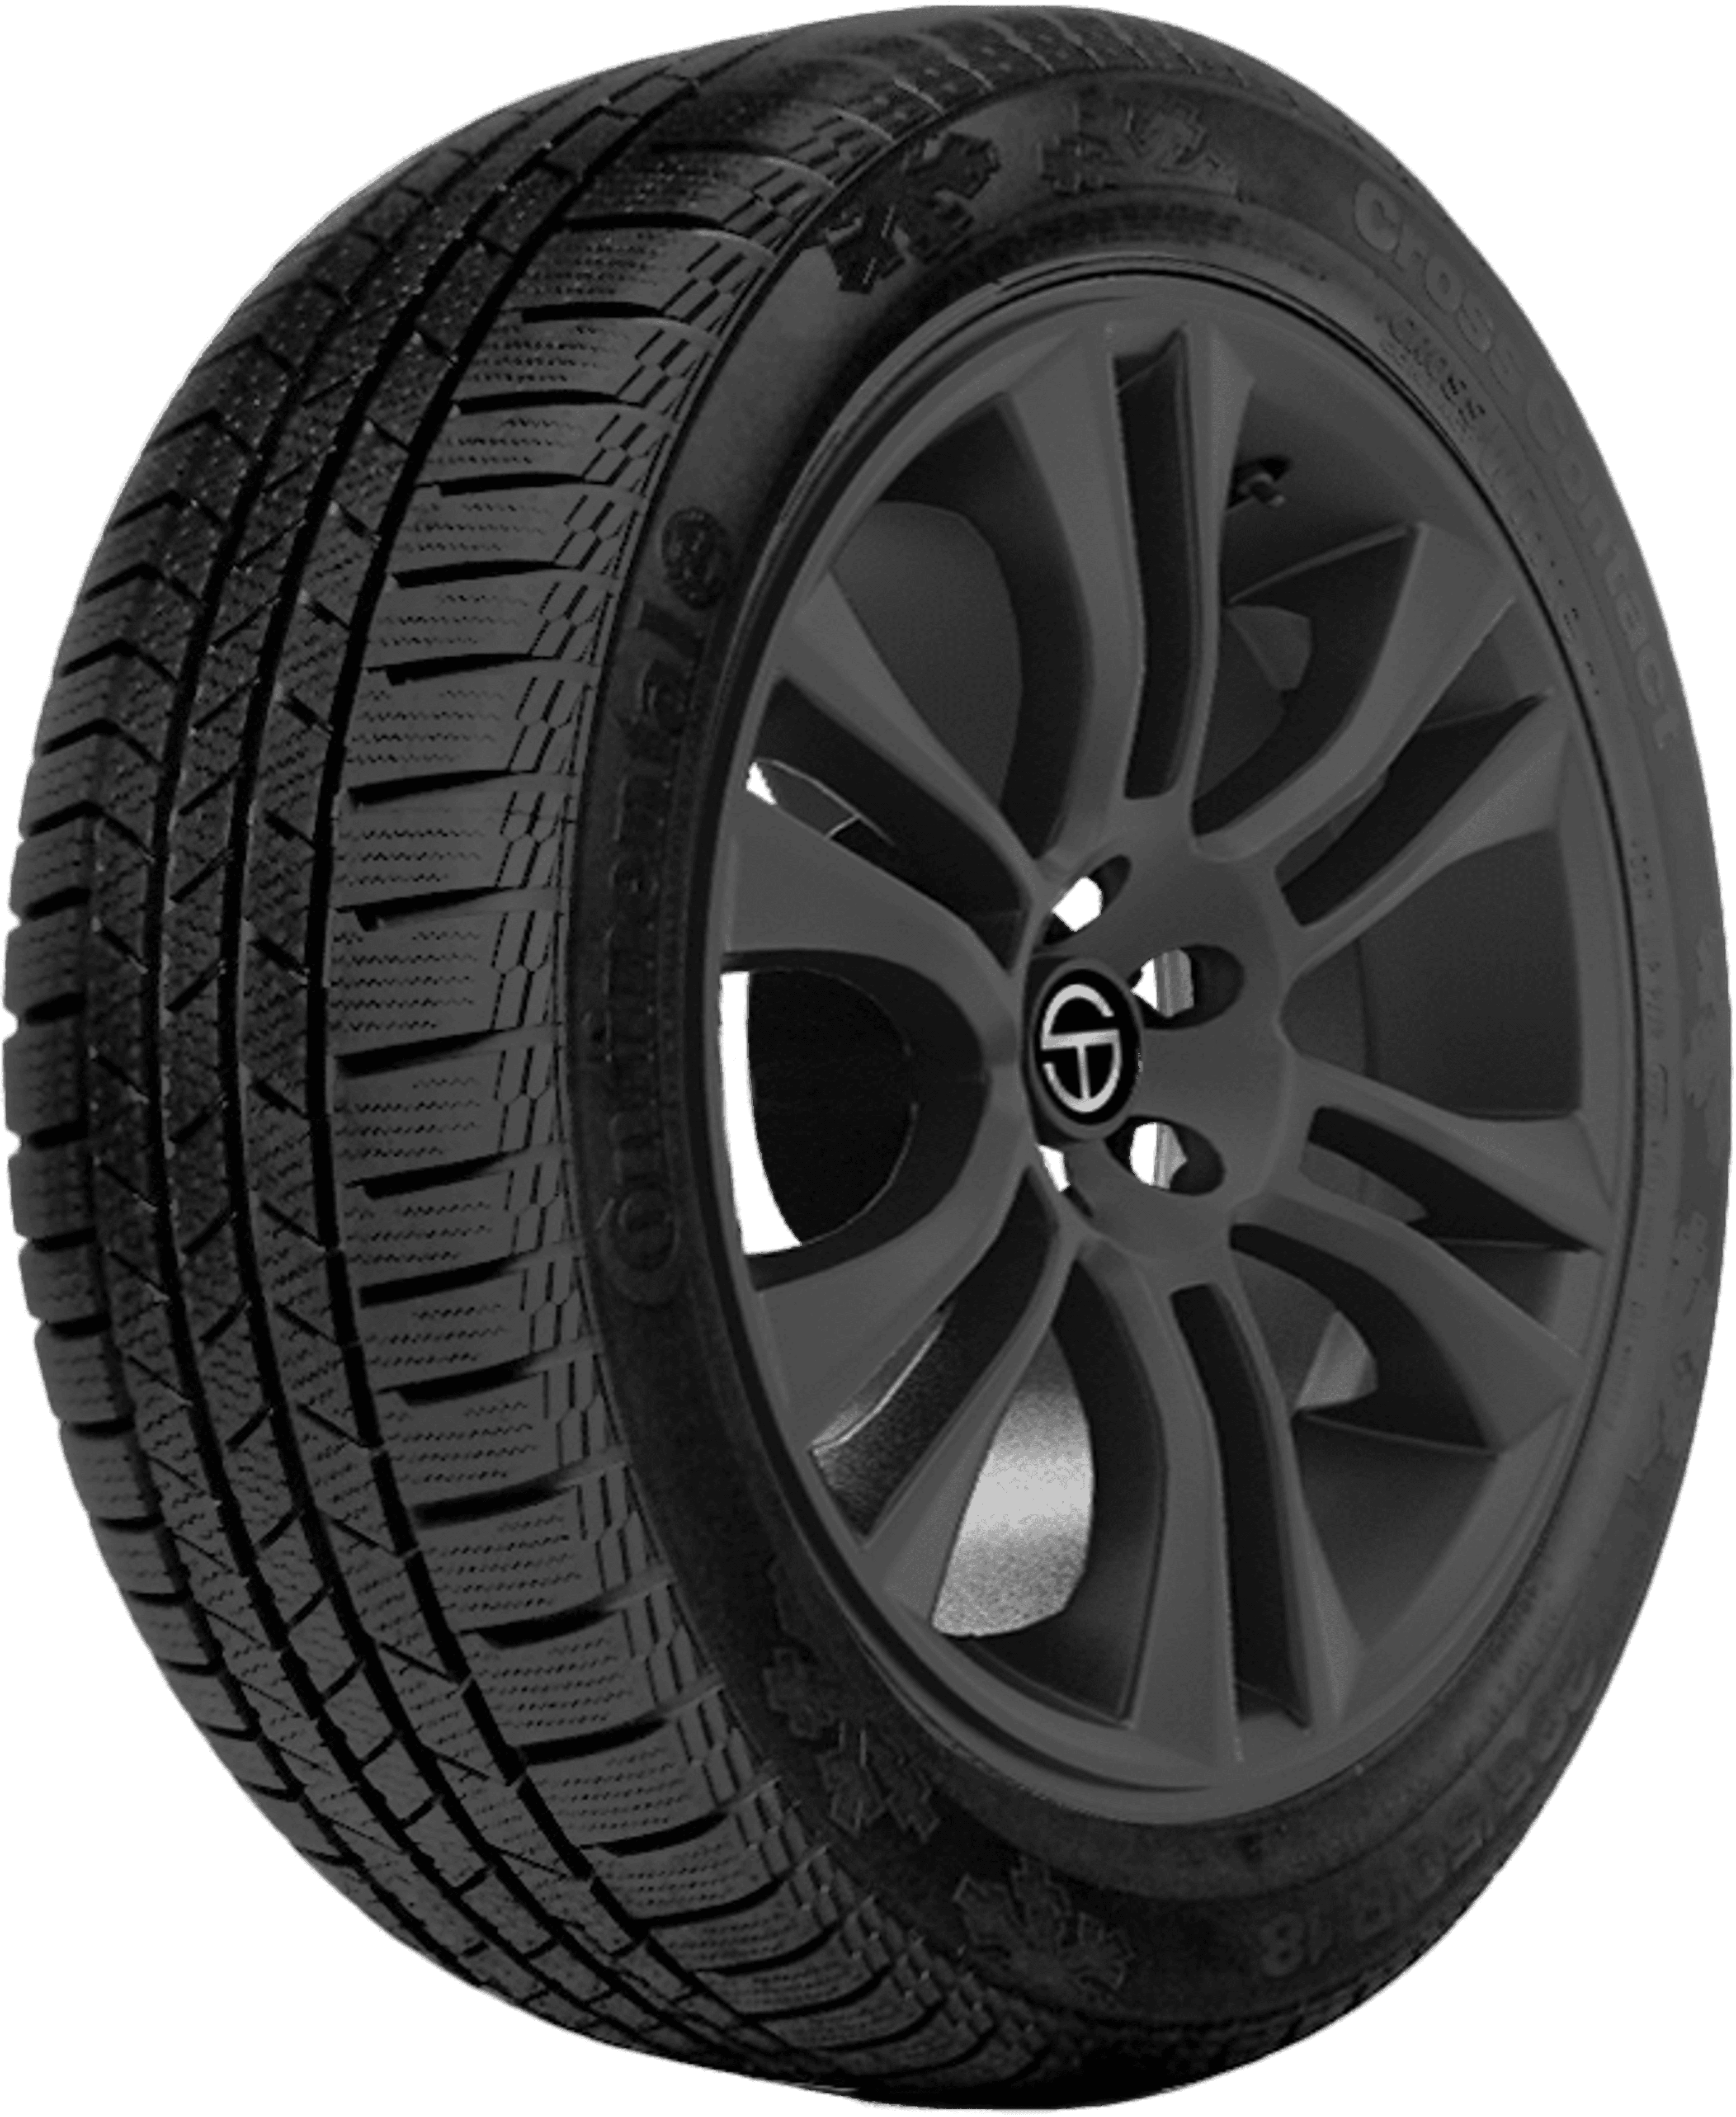 Continental Winter SimpleTire | Tires Buy ContiCrossContact Online